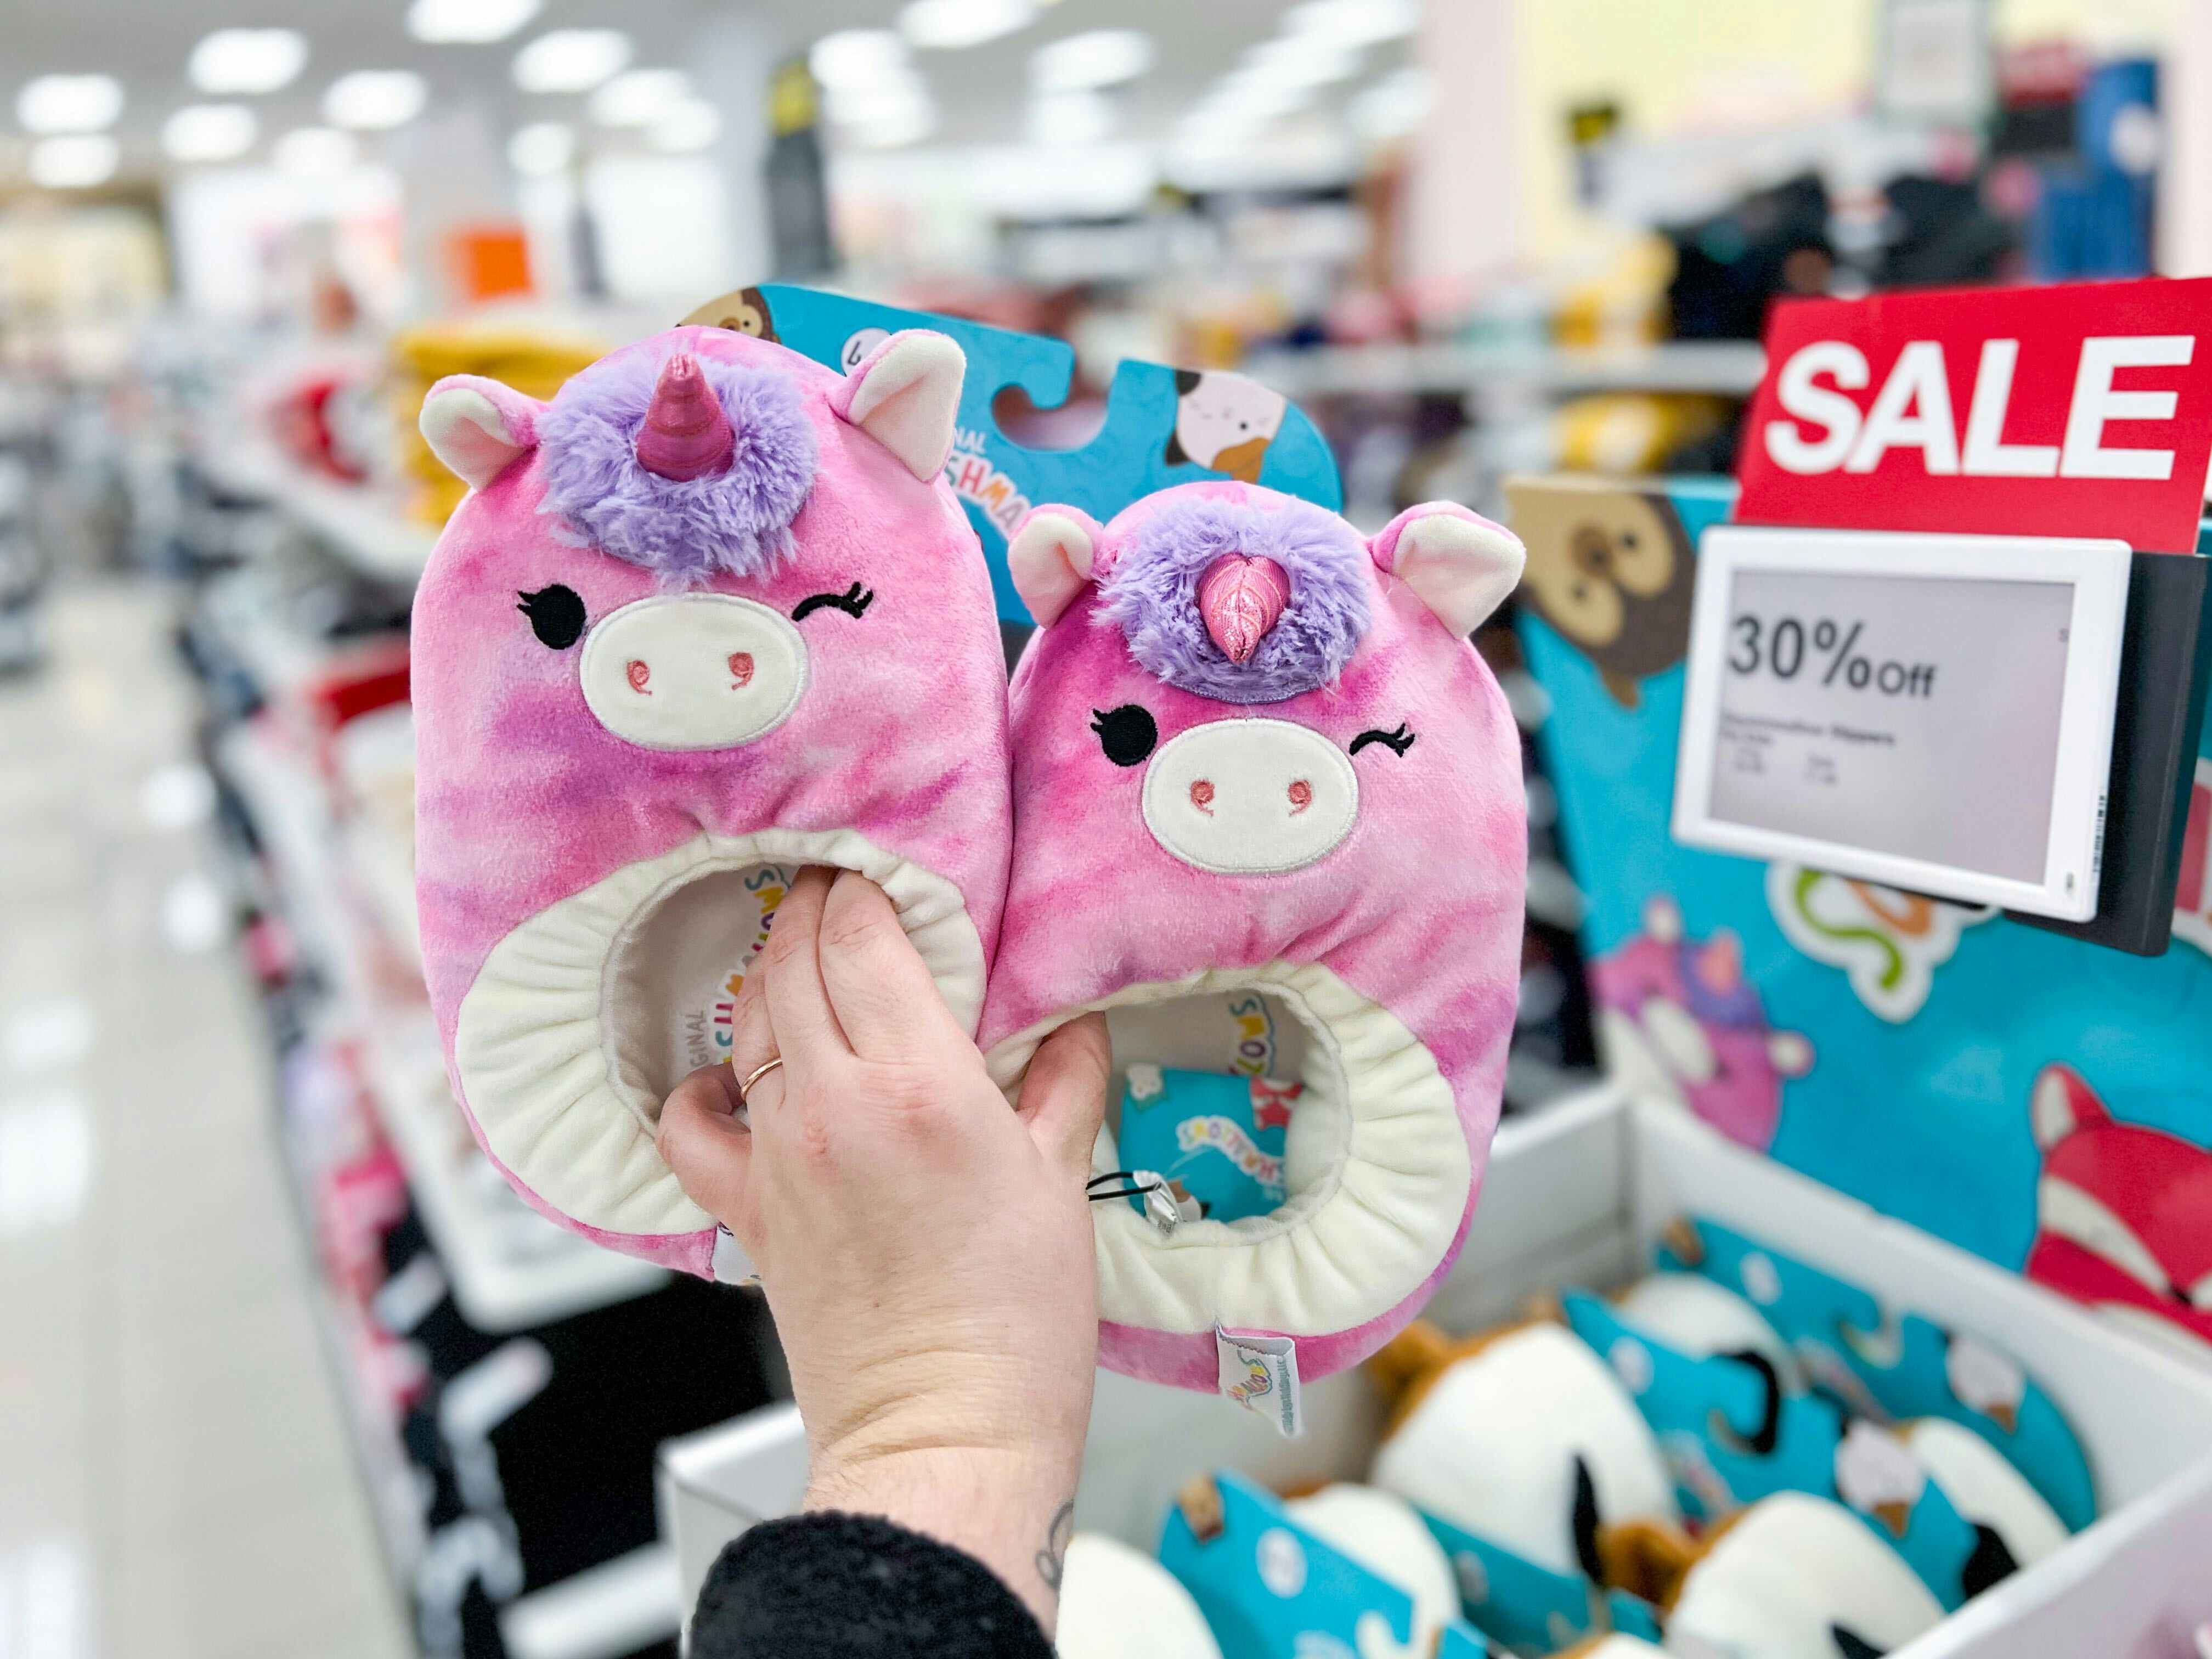 person holding squishmallow slippers in front of kohls sale sign